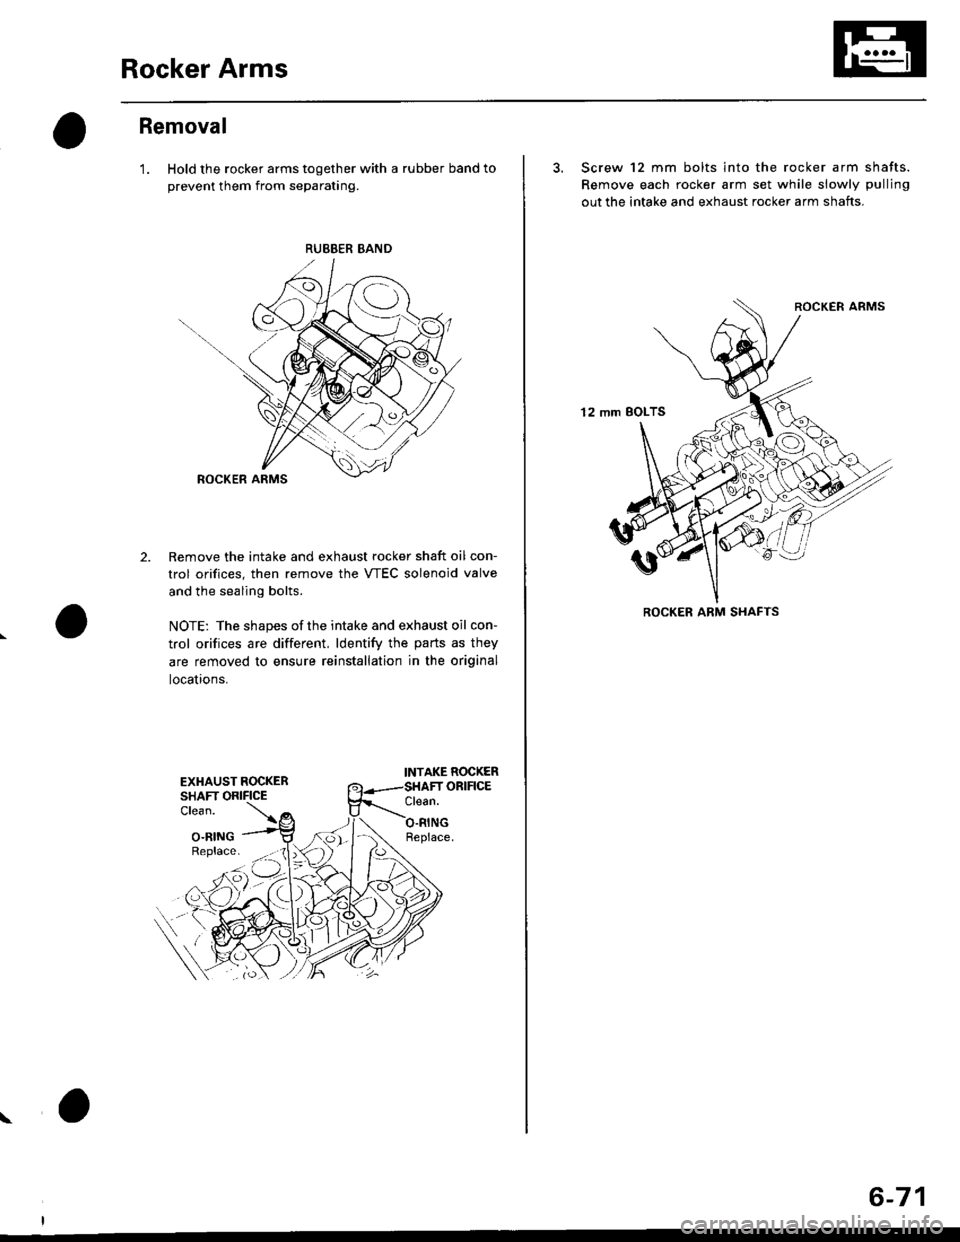 HONDA CIVIC 1998 6.G User Guide Rocker Arms
Removal
1. Hold the rocker arms together with a rubber band to
prevent them from separating.
Remove the intake and exhaust rocker shaft oil con-
trol orifices, then remove the VTEC soleno